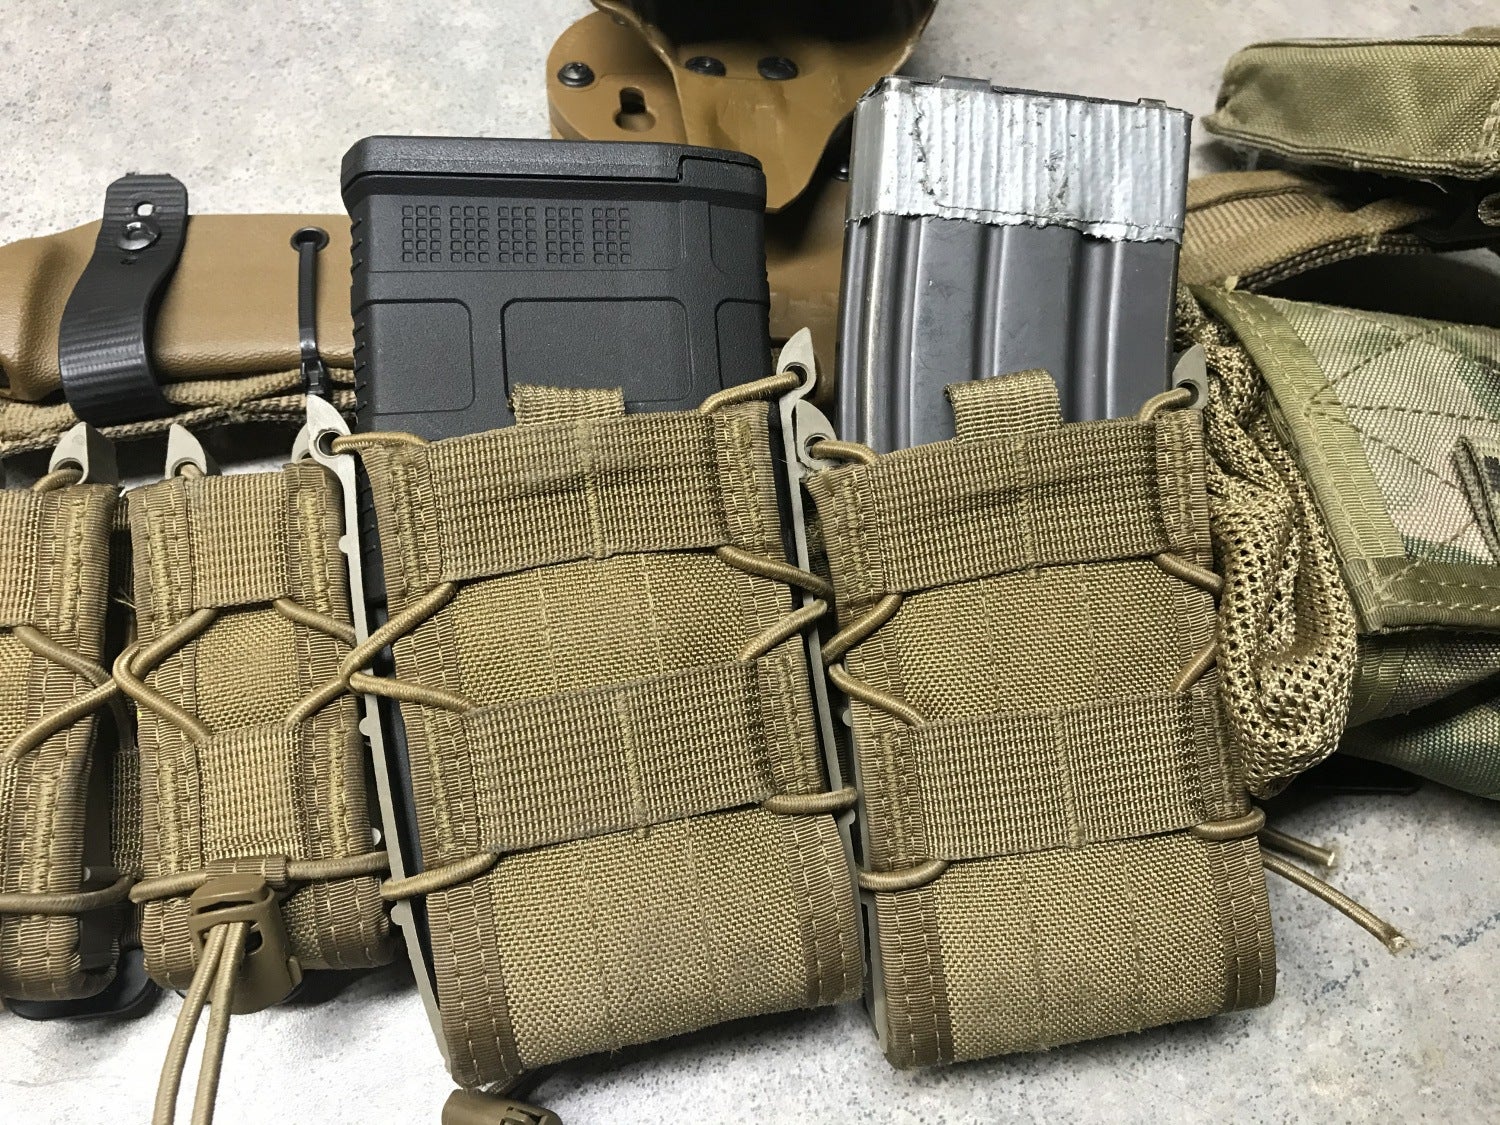 Soft Sided Mag Carriers vs Kydex Carriers - What's Best? -The Firearm Blog